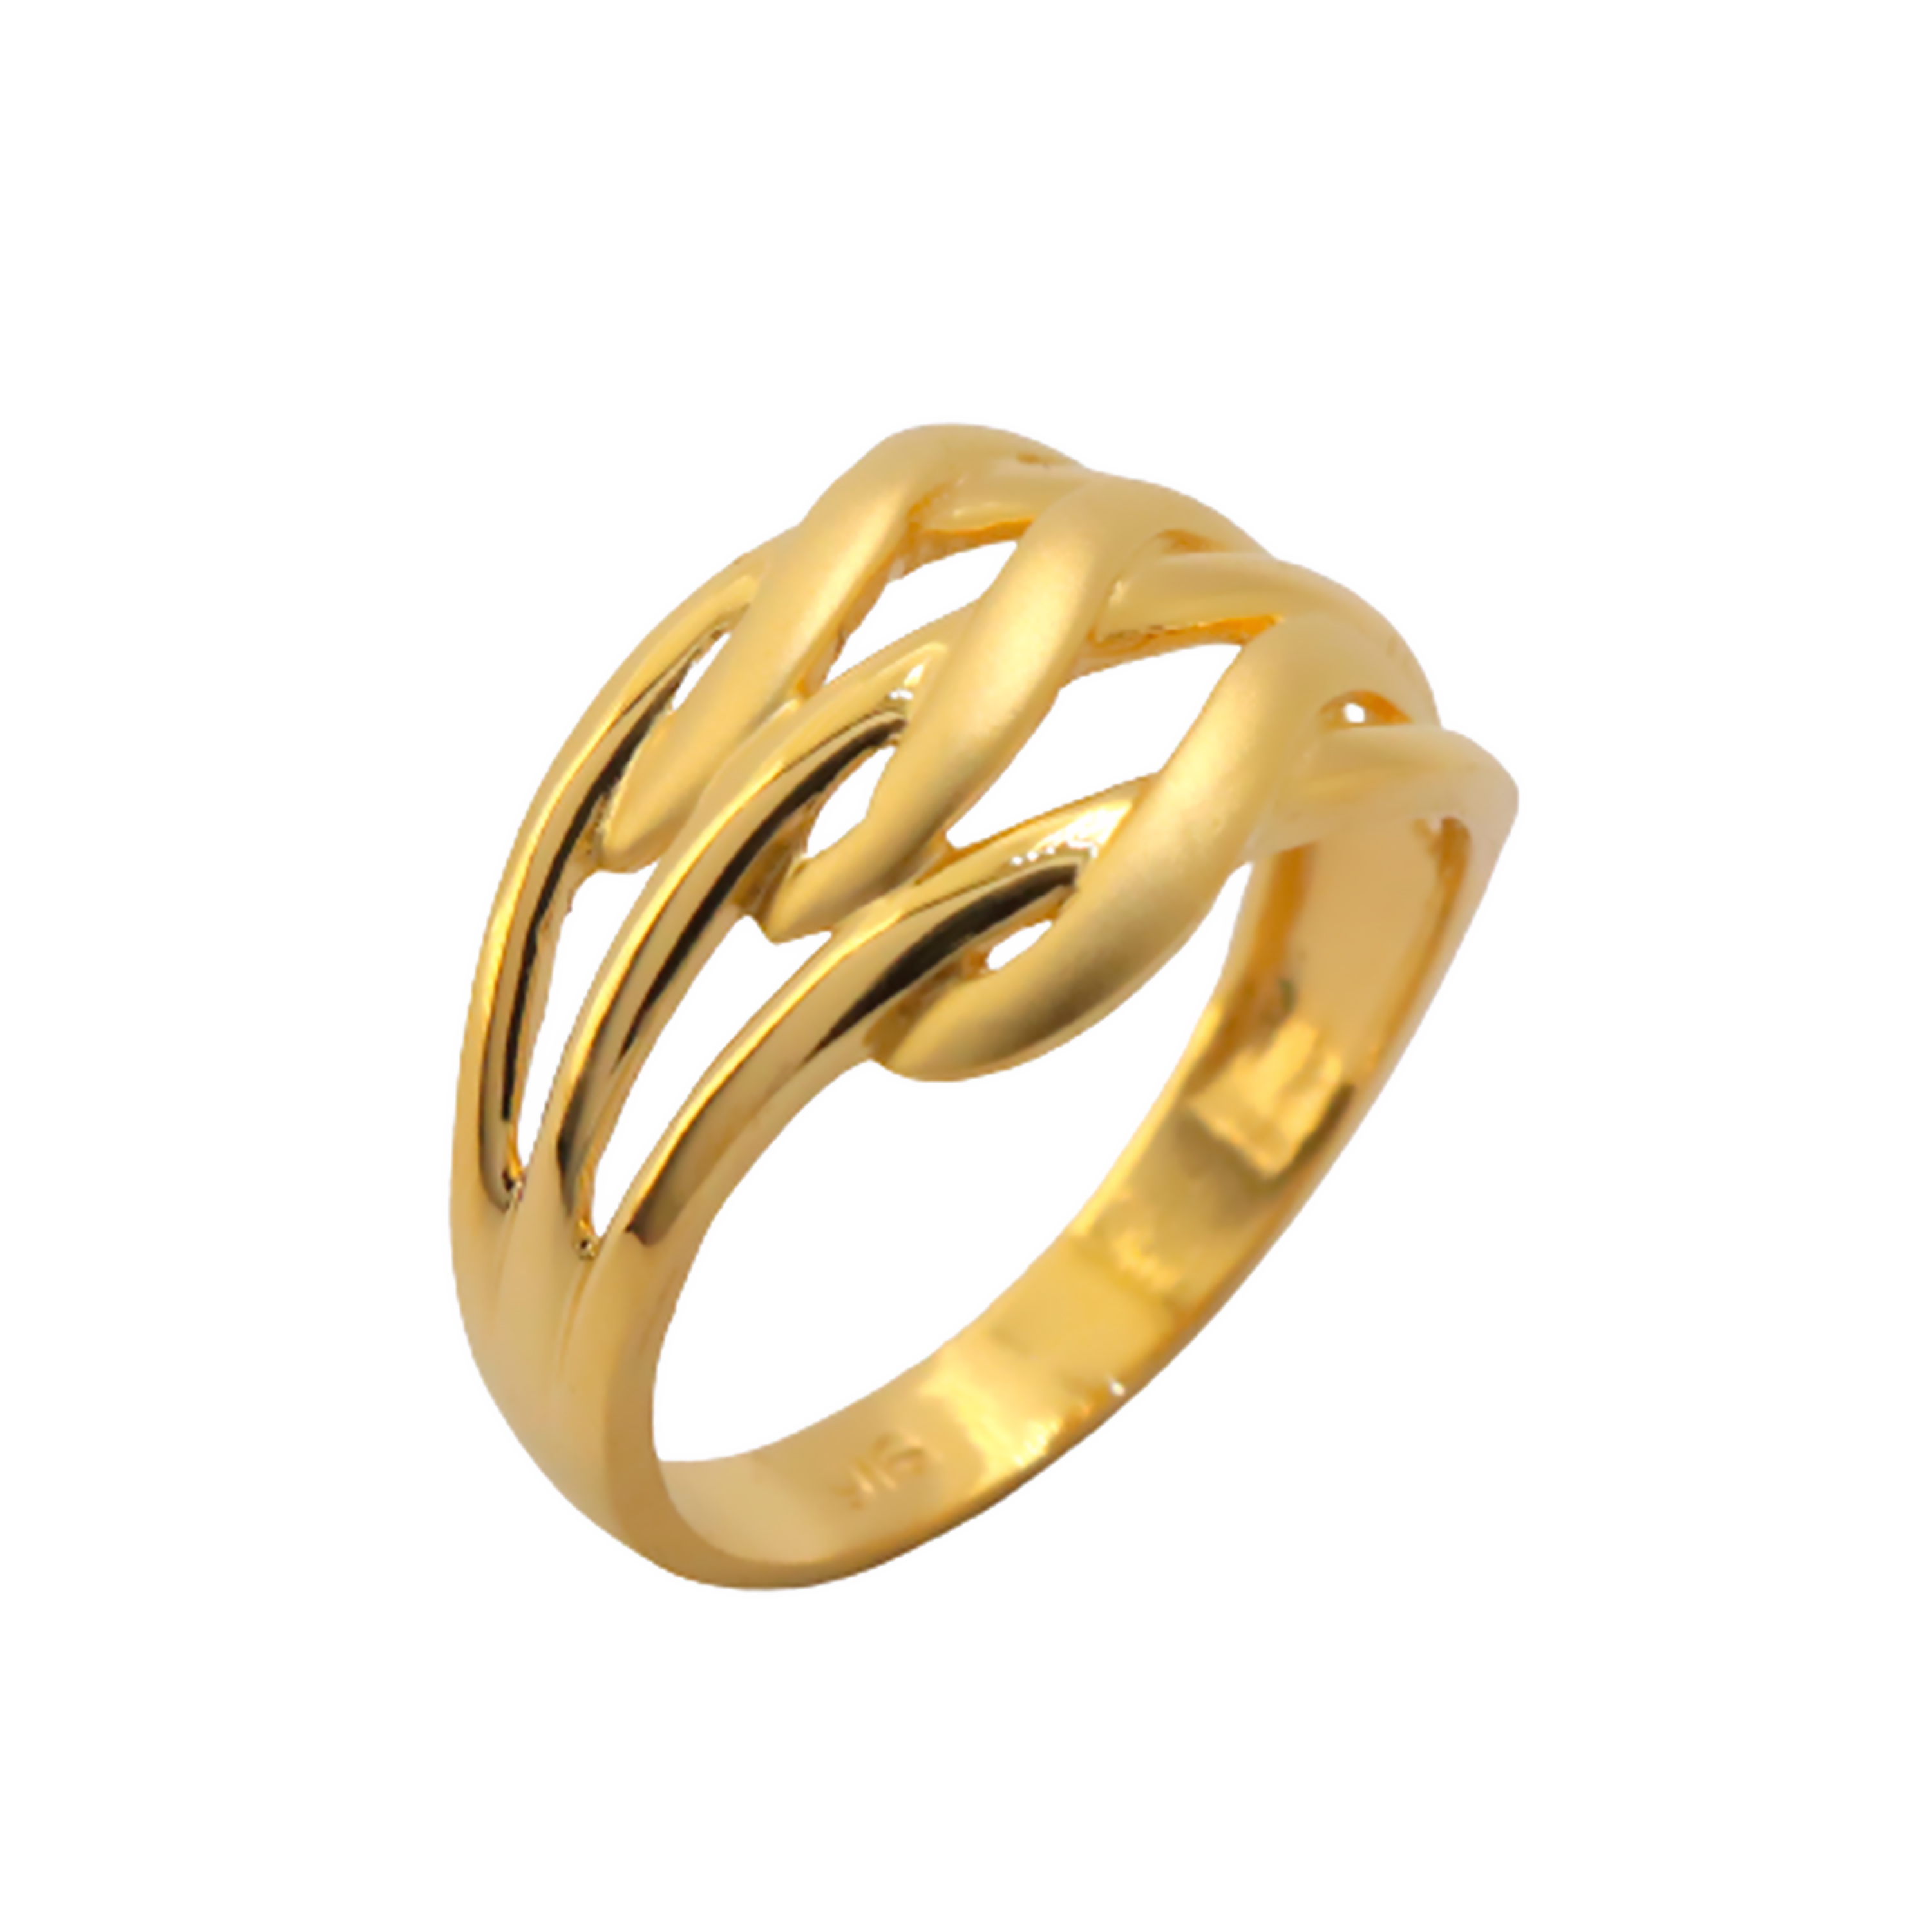 Gold Rings Designs For Daily Wear | Gold Rings Designs For D… | Flickr